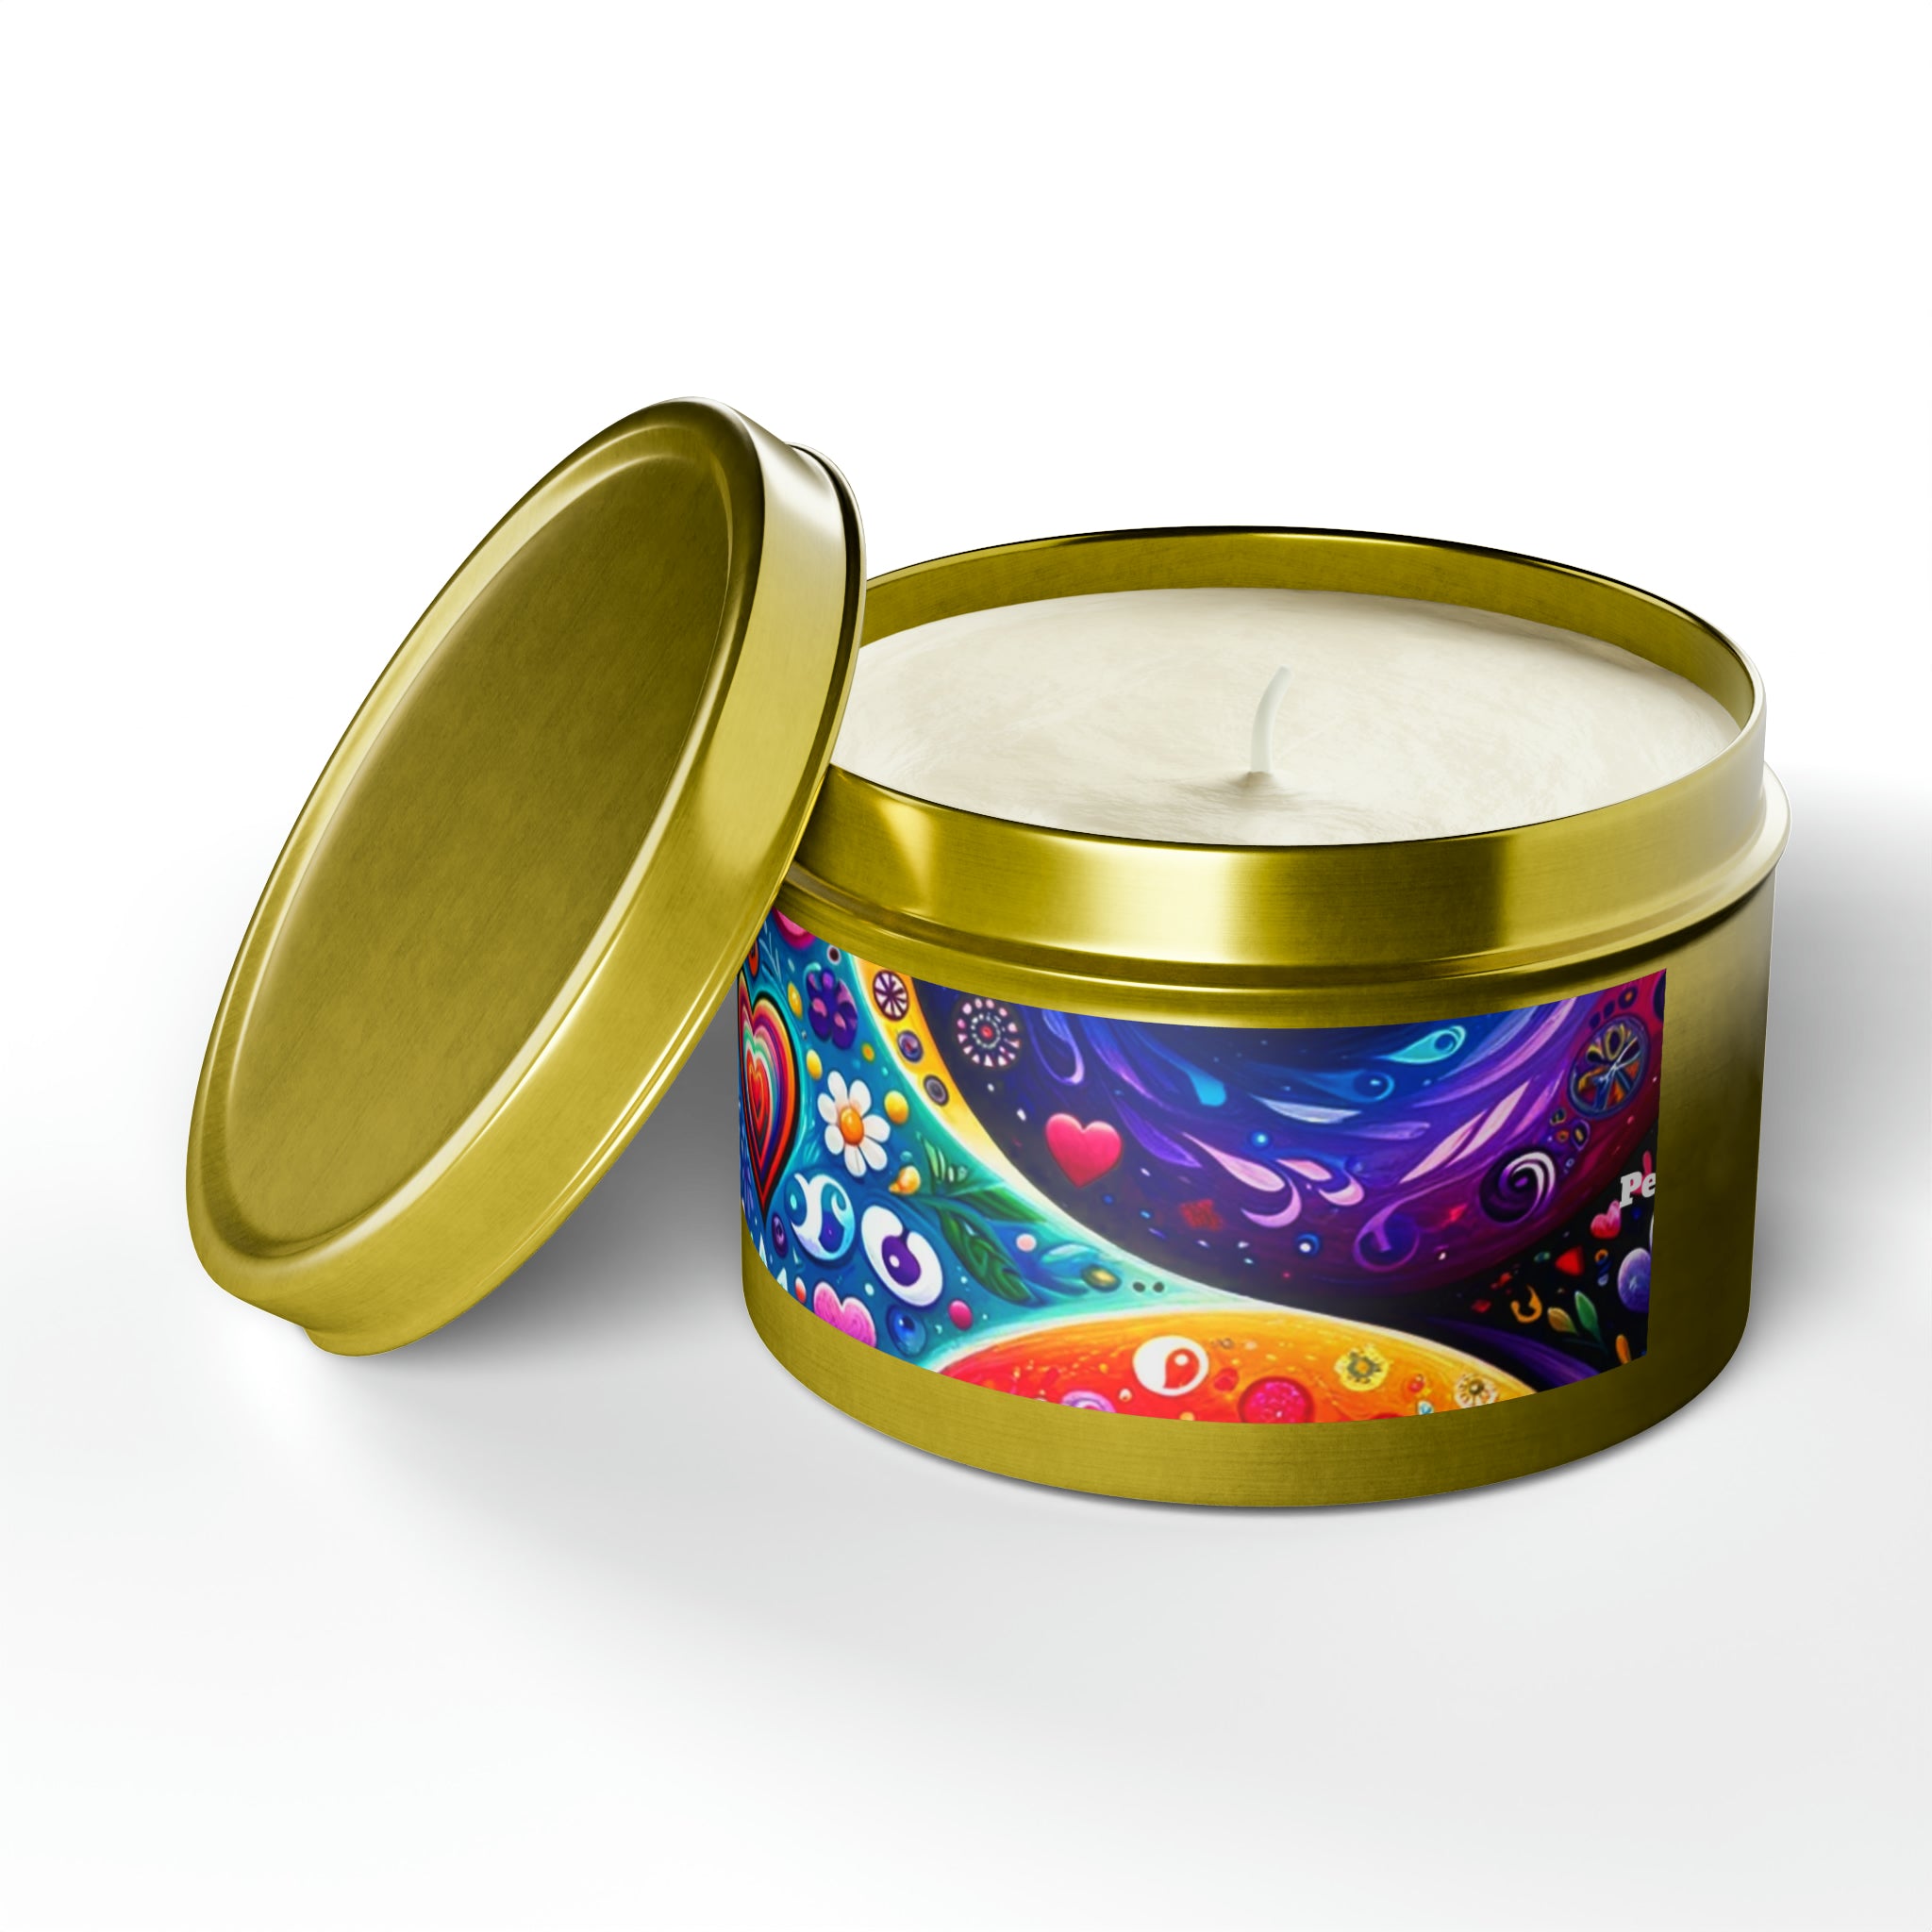 PersonalHour Love and Peace Tin Candles - Personal Hour for Yoga and Meditations